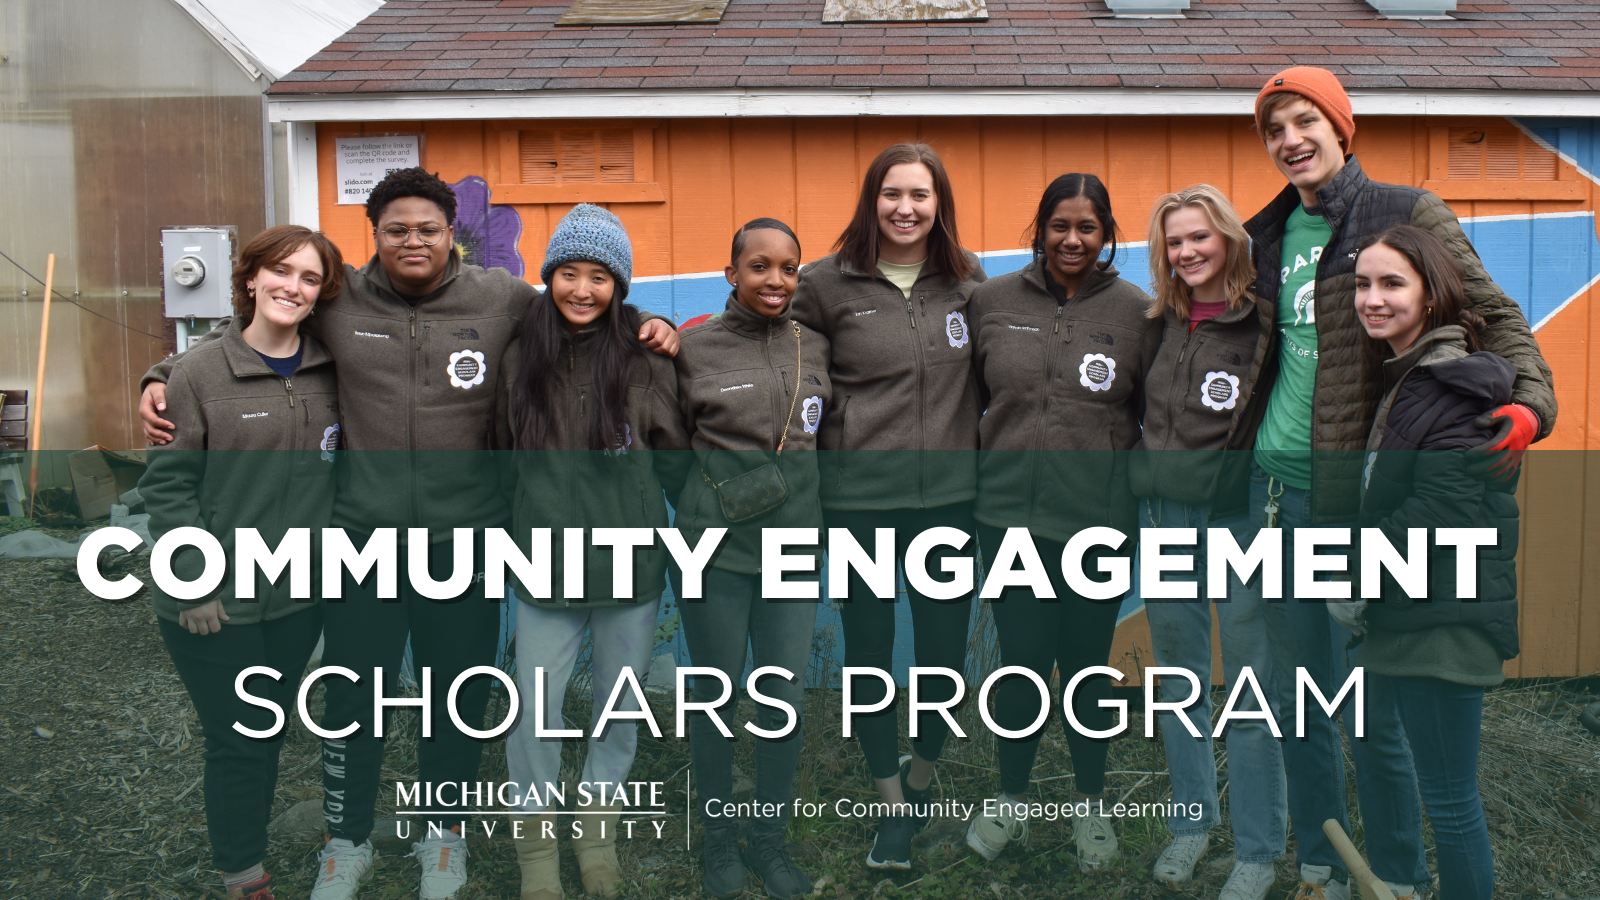 Photo of the 2021-22 scholars with text: Community Engagement Scholars Program